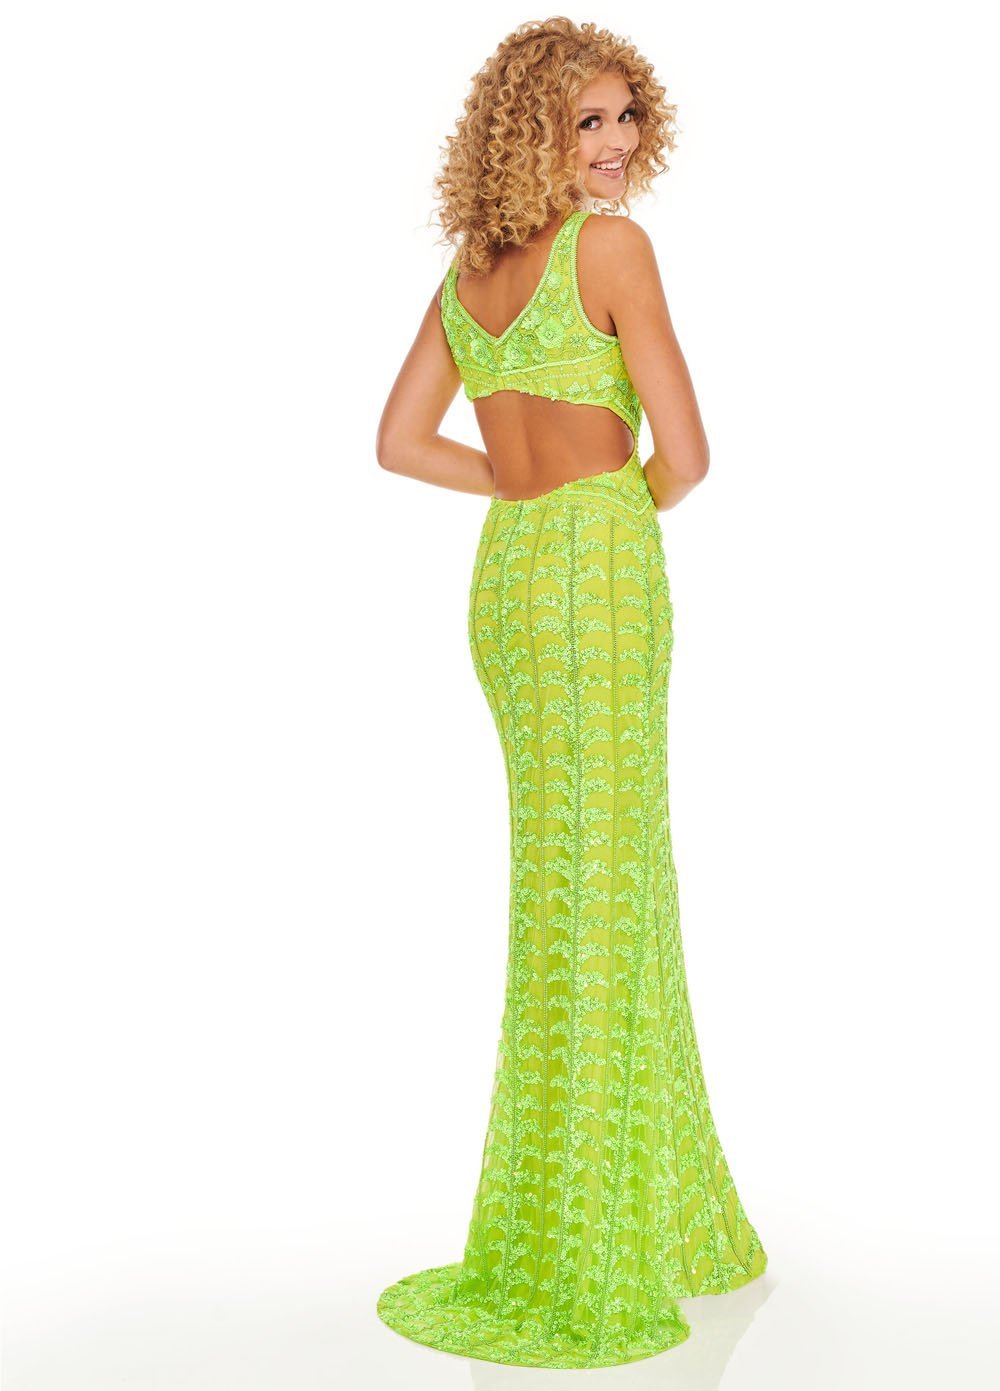 Rachel Allan 70030 dress images in these colors: Gold, Neon Green.